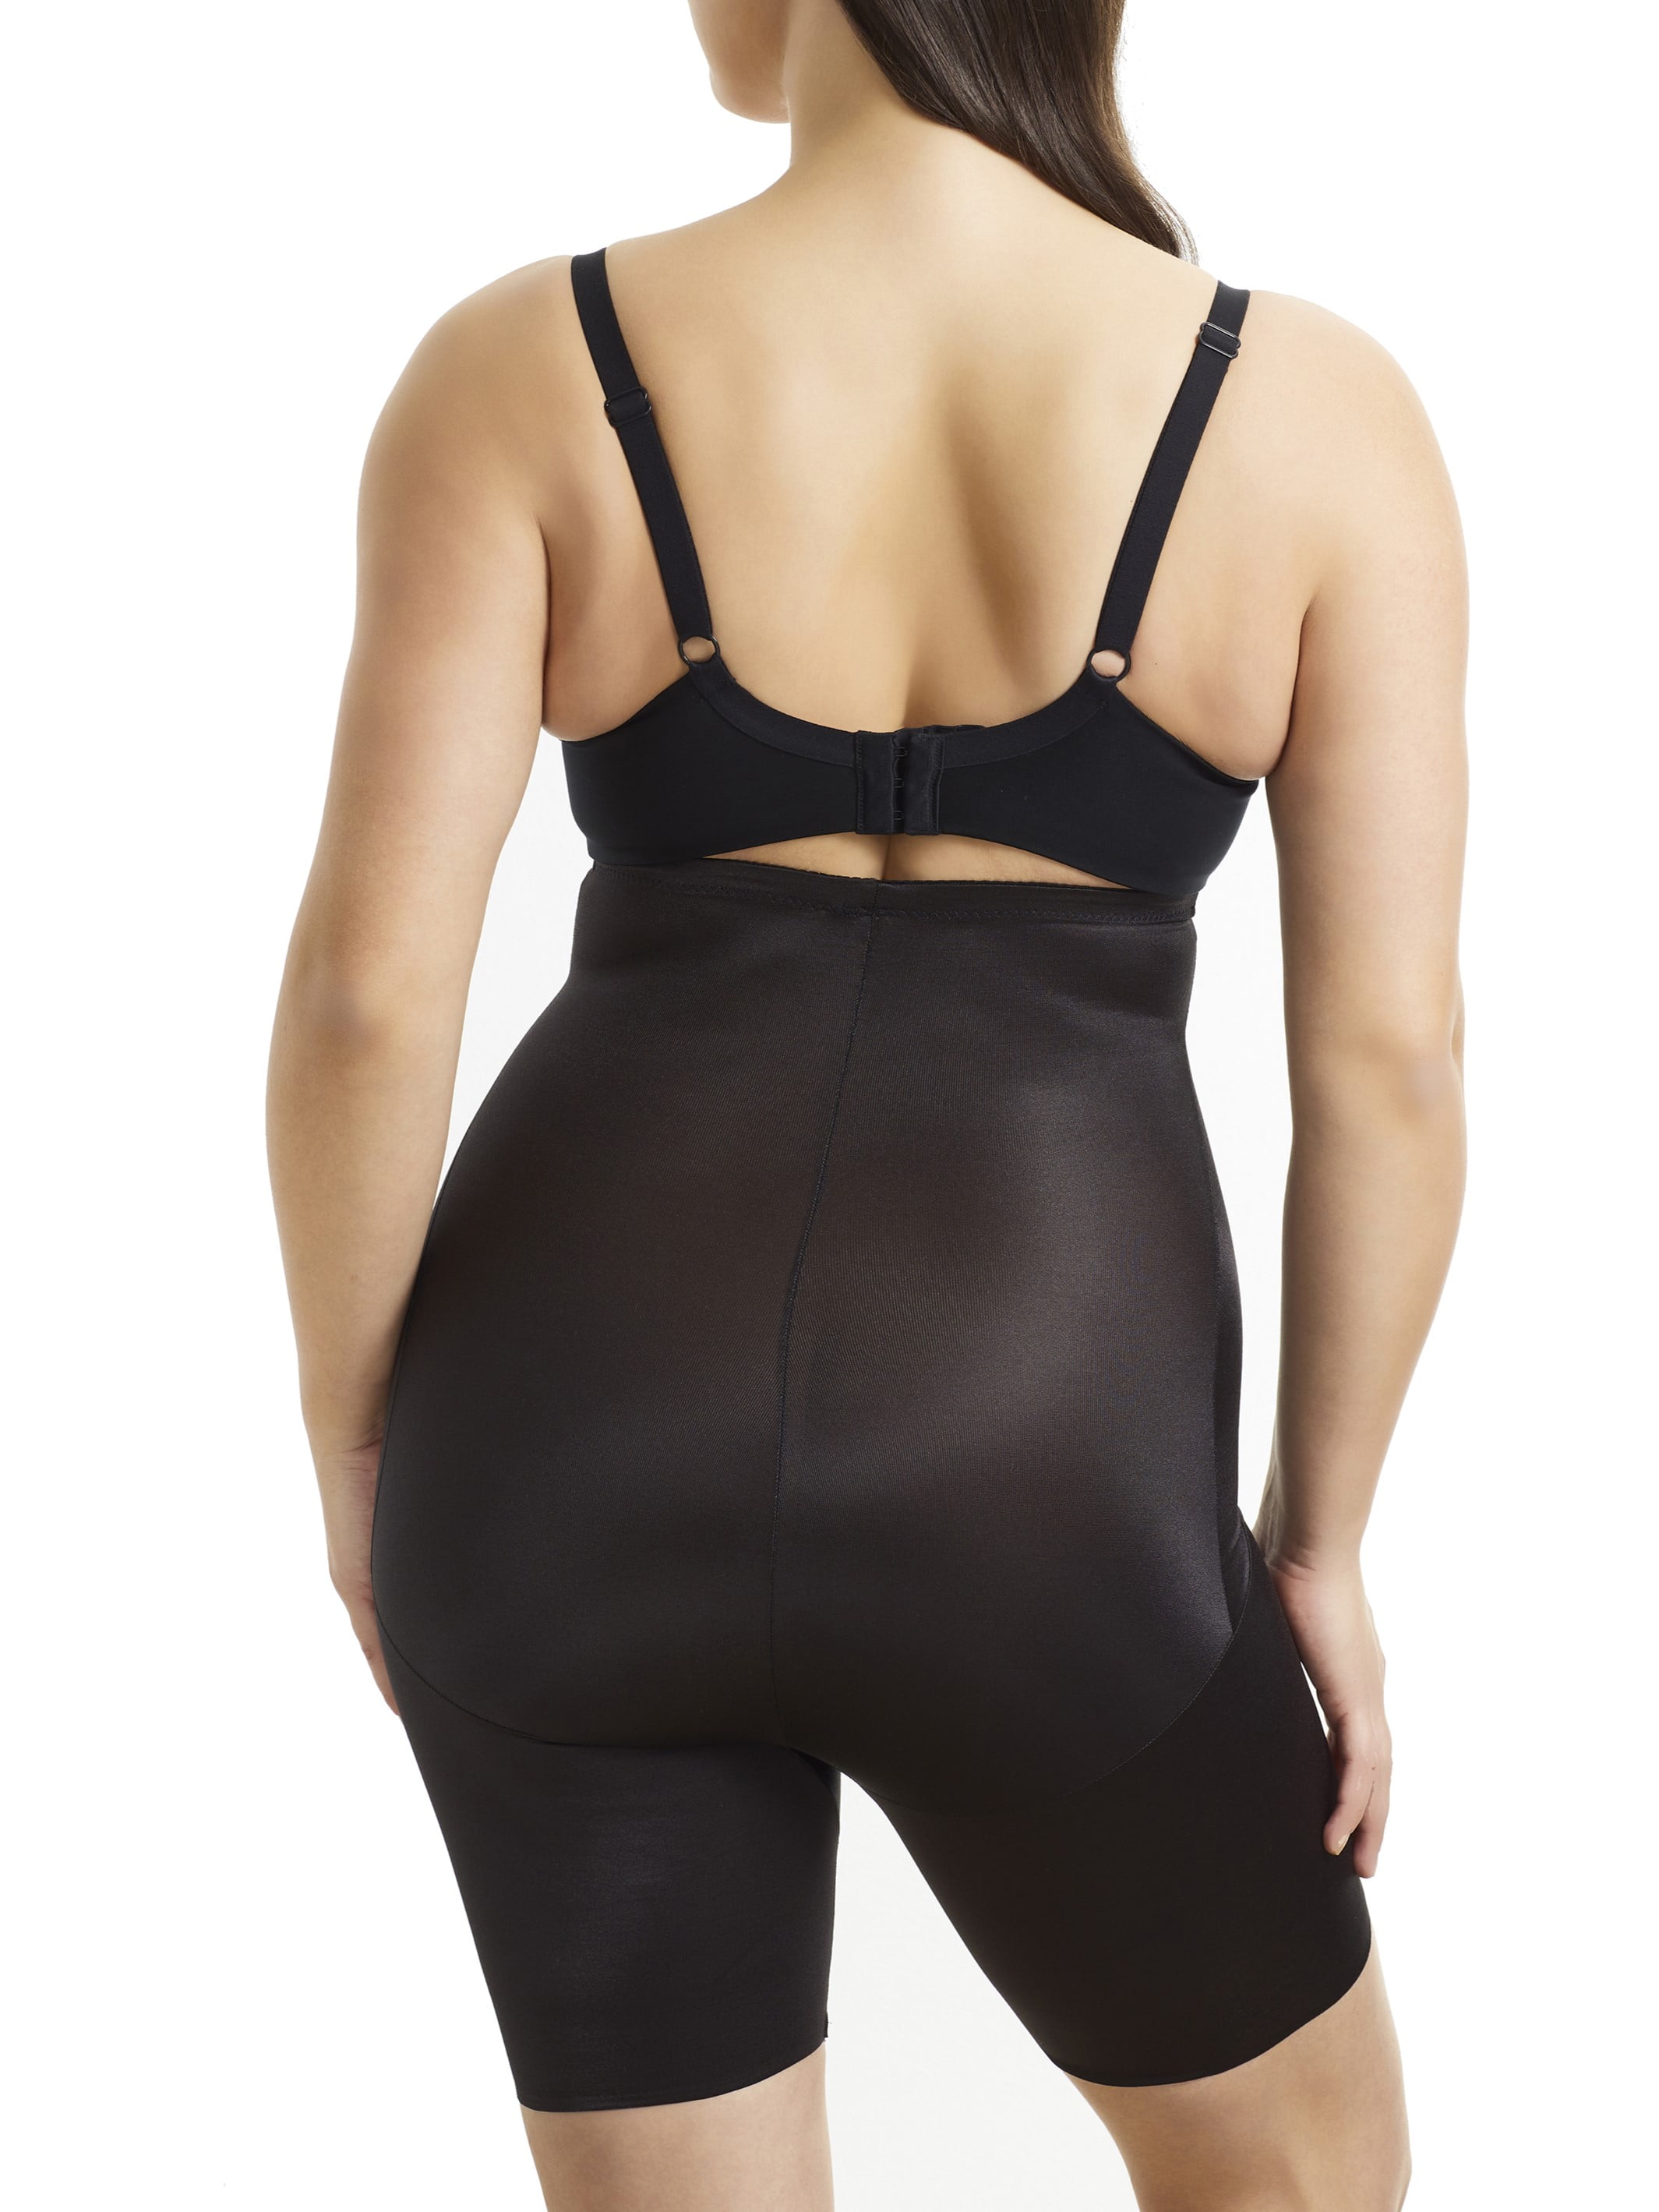 Cupid® Plus Size Extra Firm Control Hi-Waist Thigh Slimmer 5754